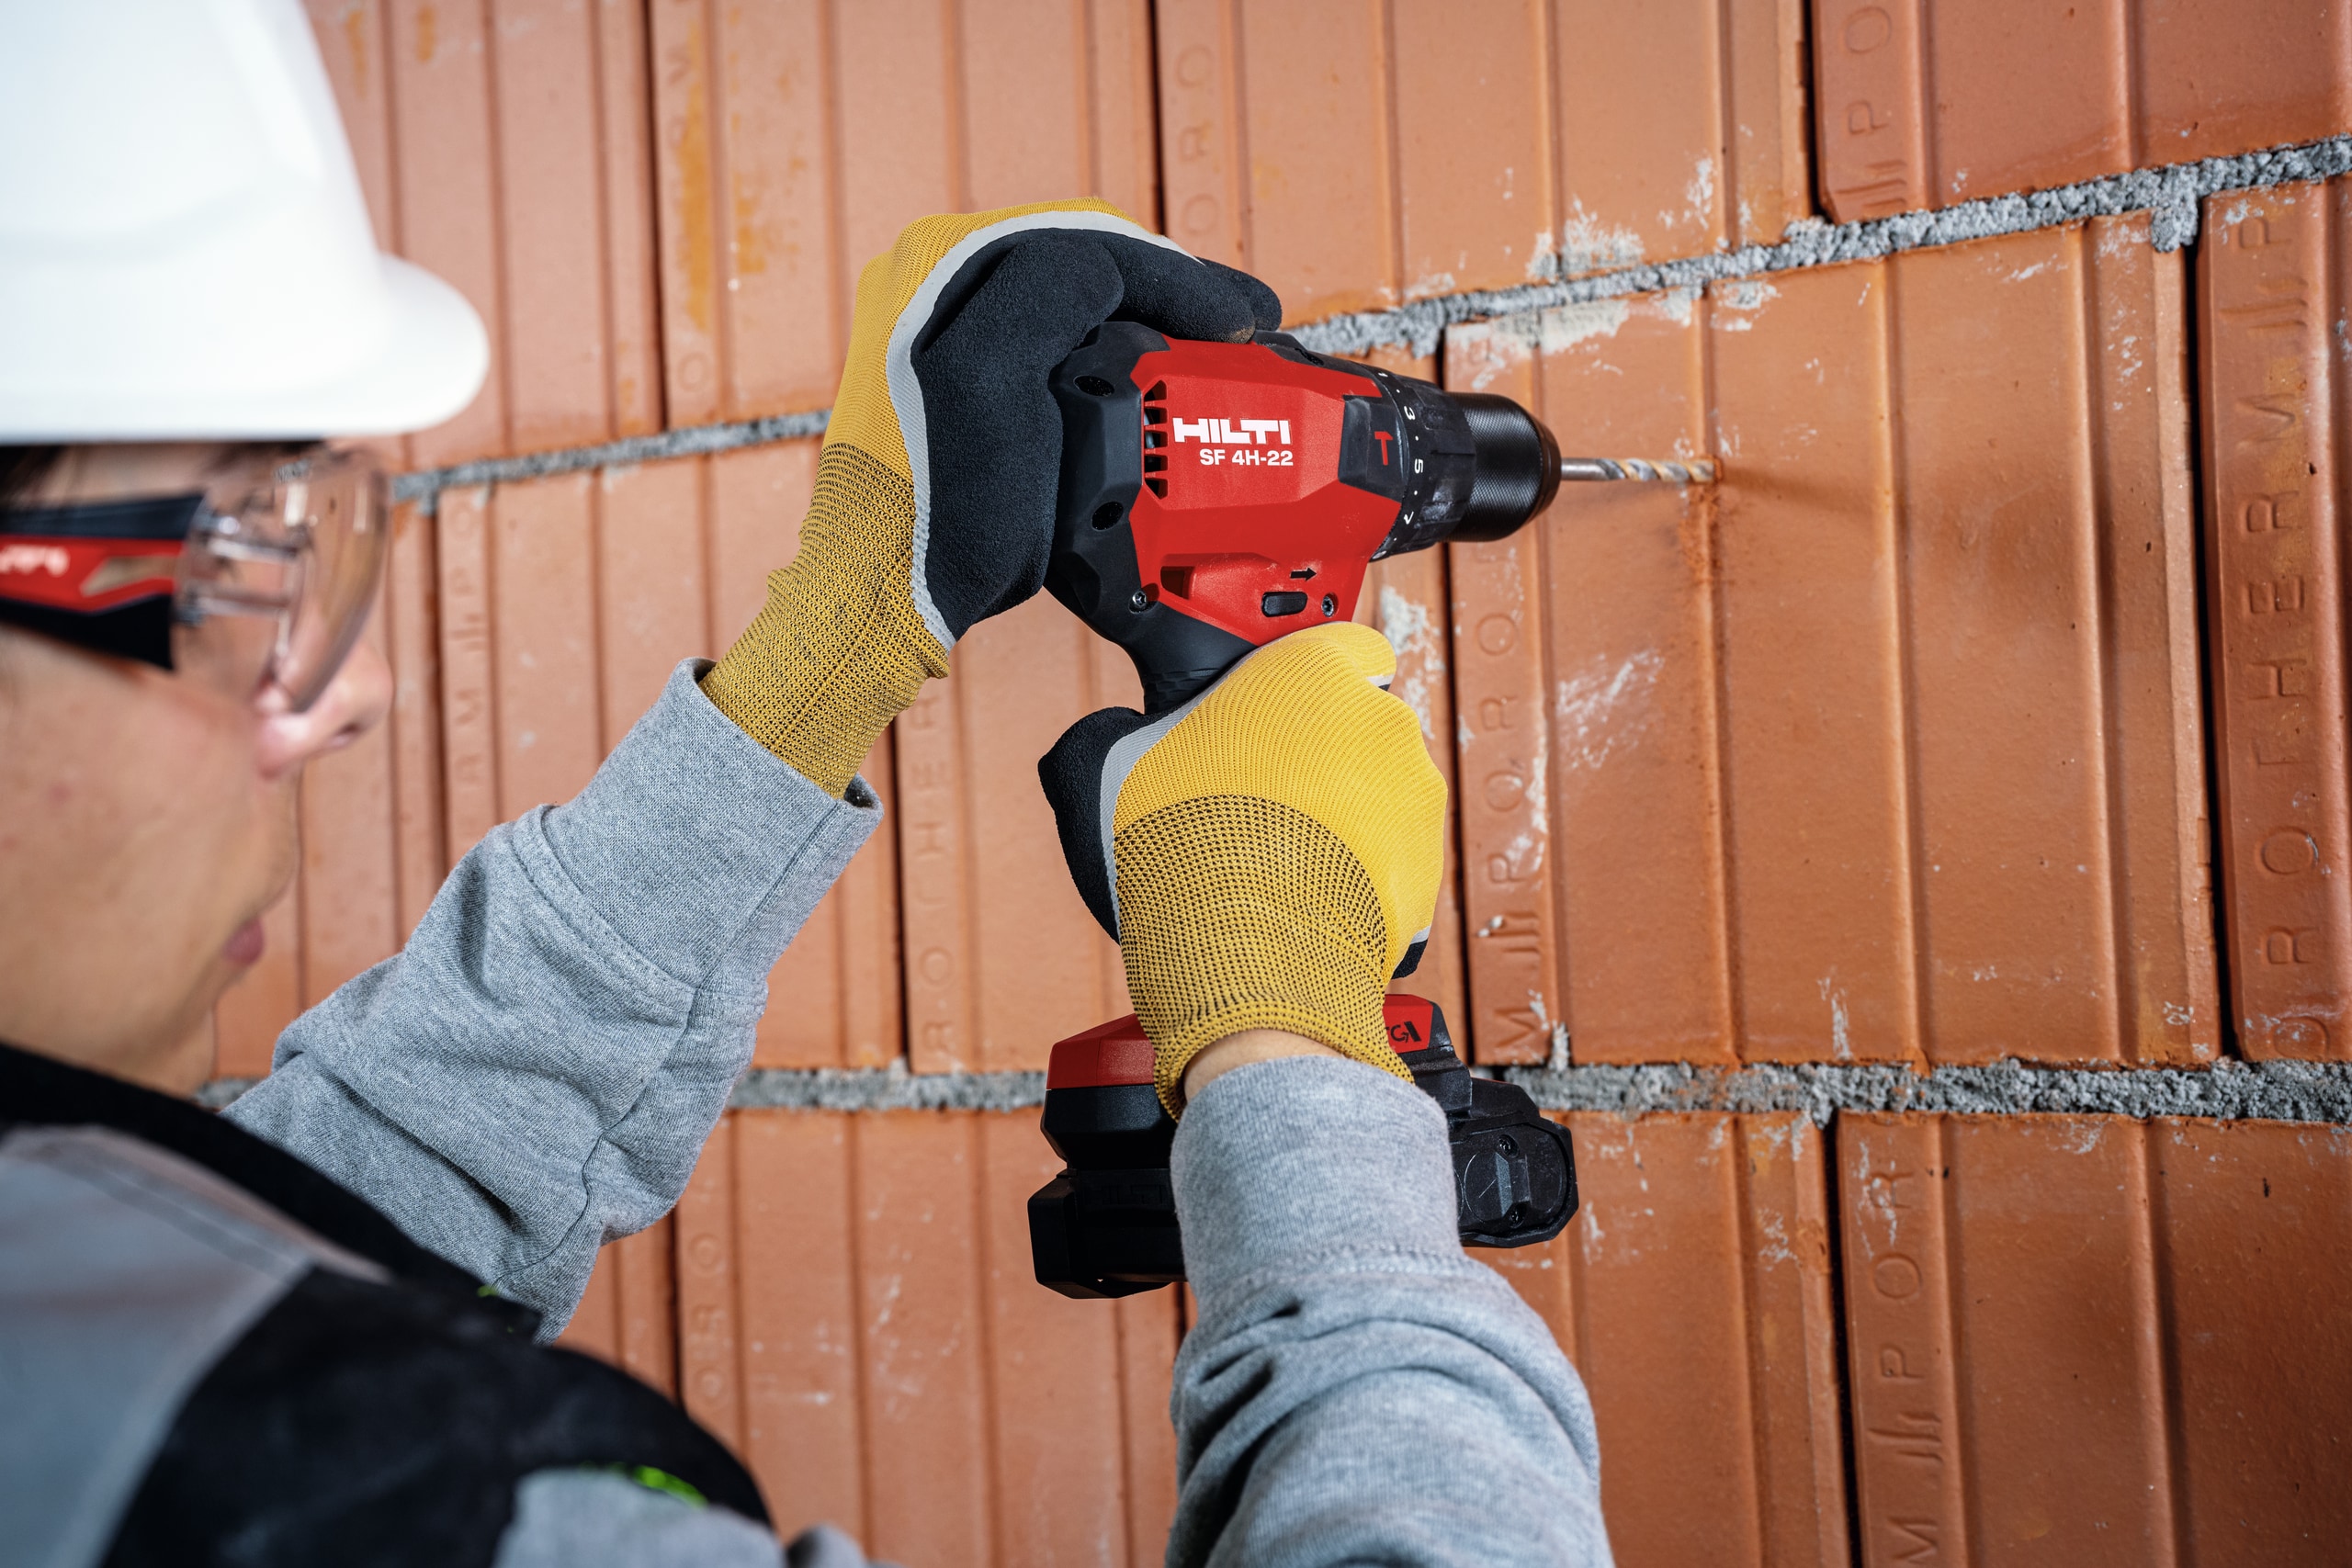 SF 4H-22 cordless tools without compromise 